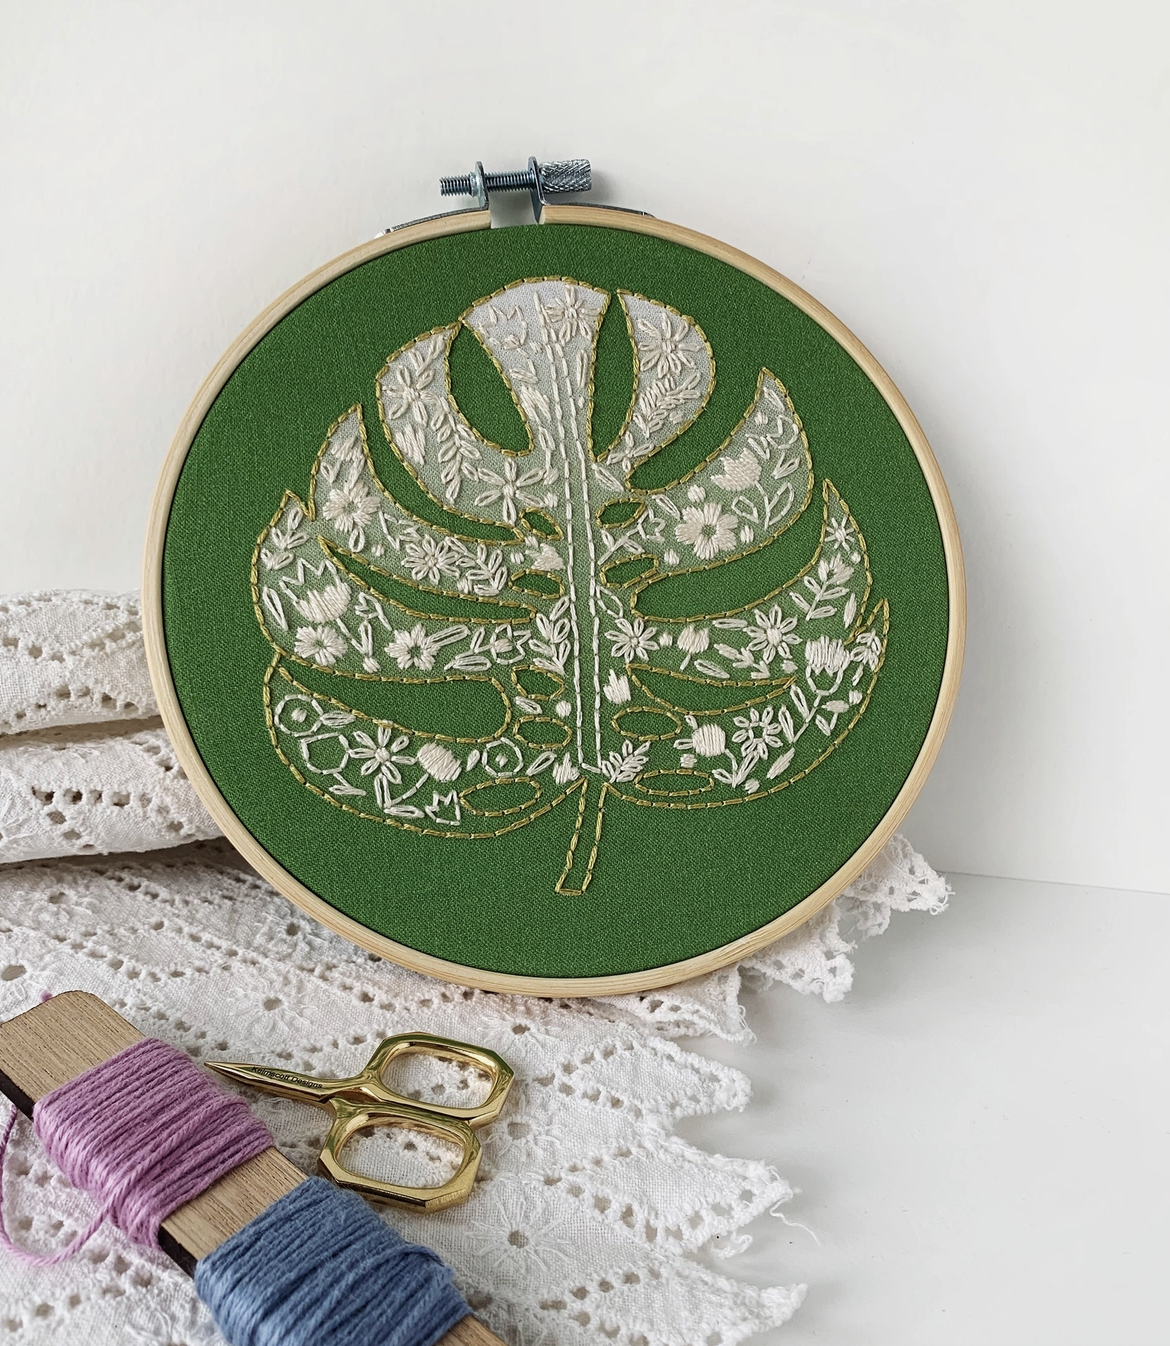 DIY - Embroidery - Monstera